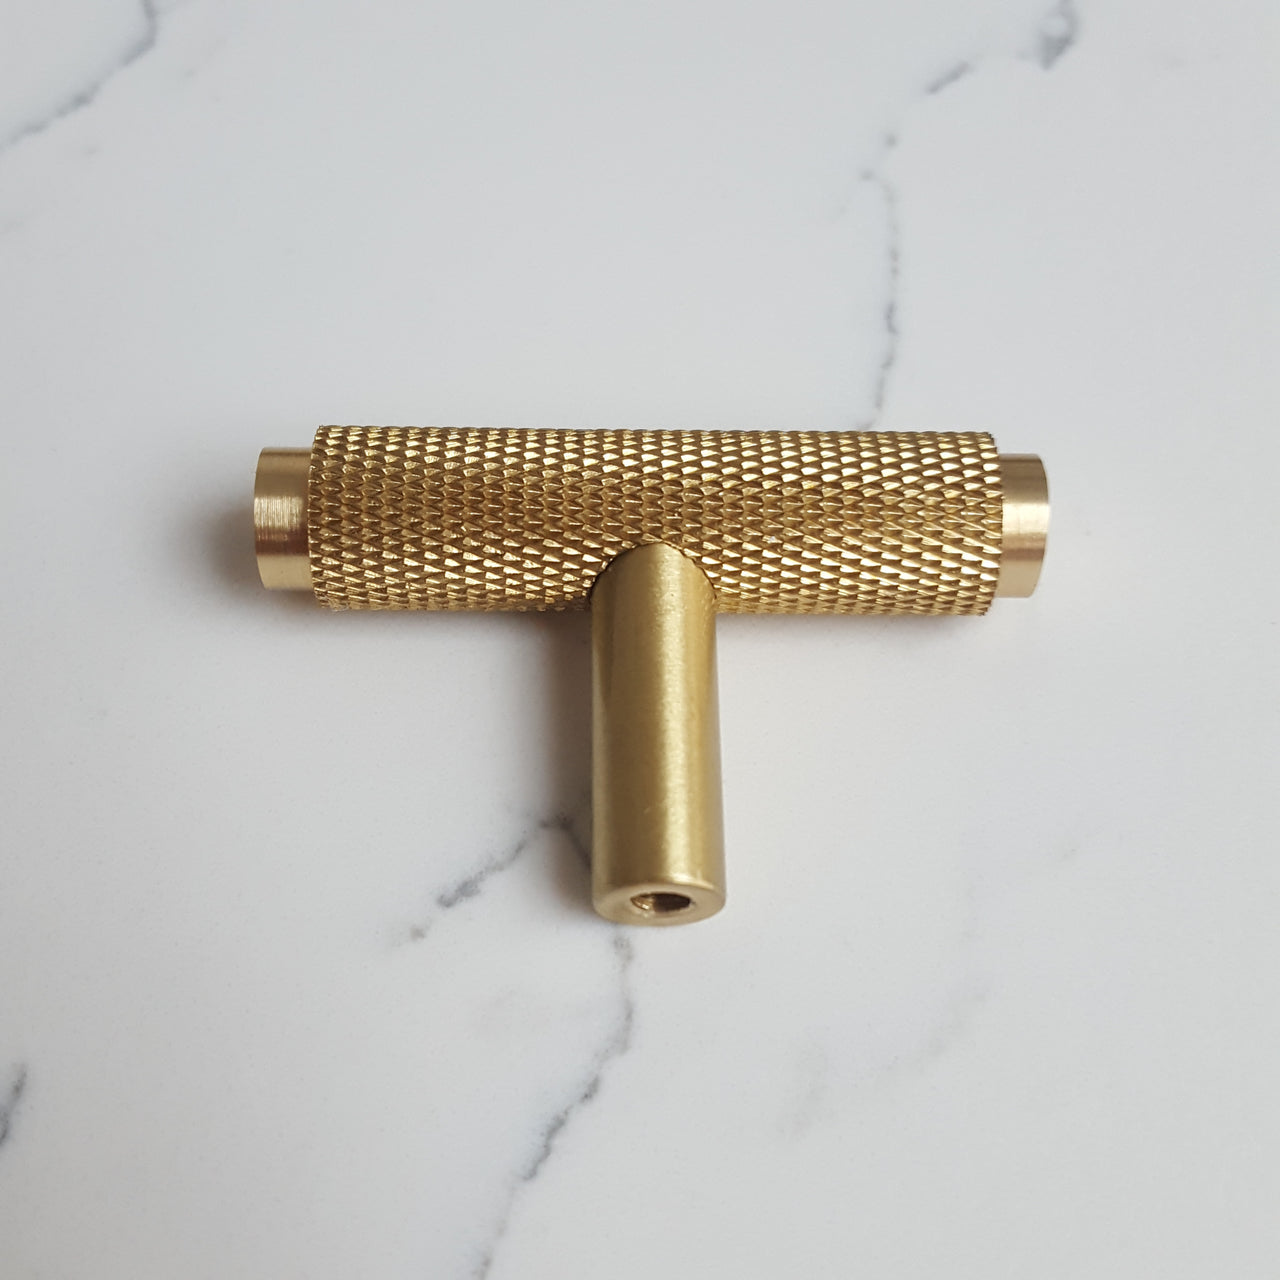 Satin Brass Knurled T-Bar Cabinet/Drawer/Cupboard Pull Handle - 50mm